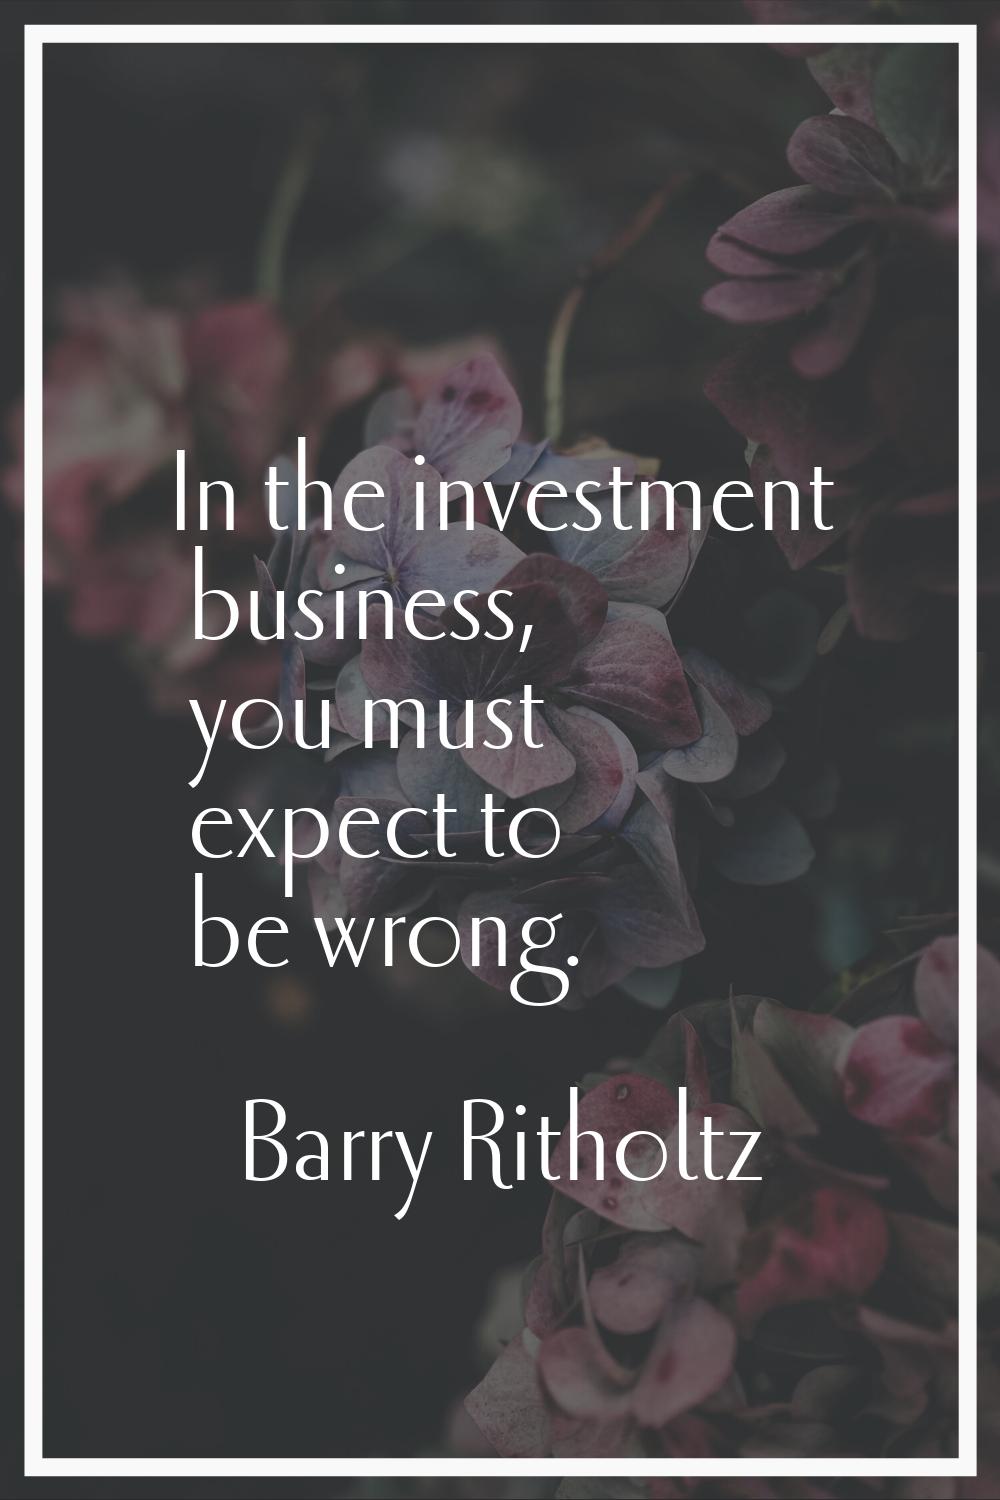 In the investment business, you must expect to be wrong.